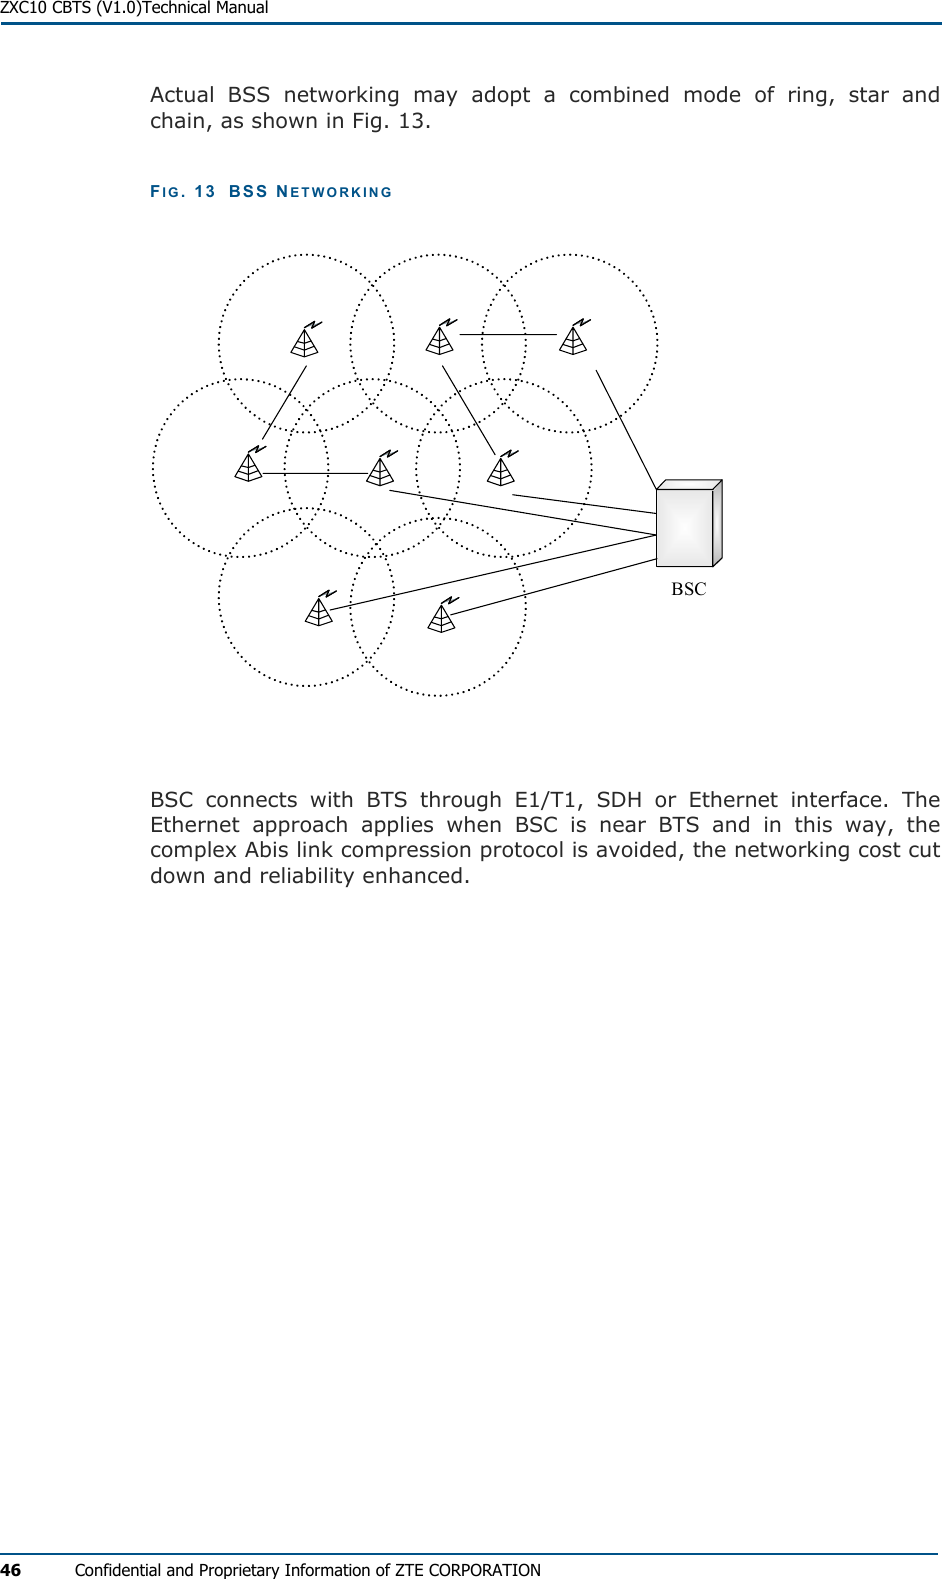  ZXC10 CBTS (V1.0)Technical Manual 46  Confidential and Proprietary Information of ZTE CORPORATION Actual BSS networking may adopt a combined mode of ring, star and chain, as shown in Fig. 13. FIG. 13  BSS NETWORKING BSC  BSC connects with BTS through E1/T1, SDH or Ethernet interface. The Ethernet approach applies when BSC is near BTS and in this way, the complex Abis link compression protocol is avoided, the networking cost cut down and reliability enhanced.  